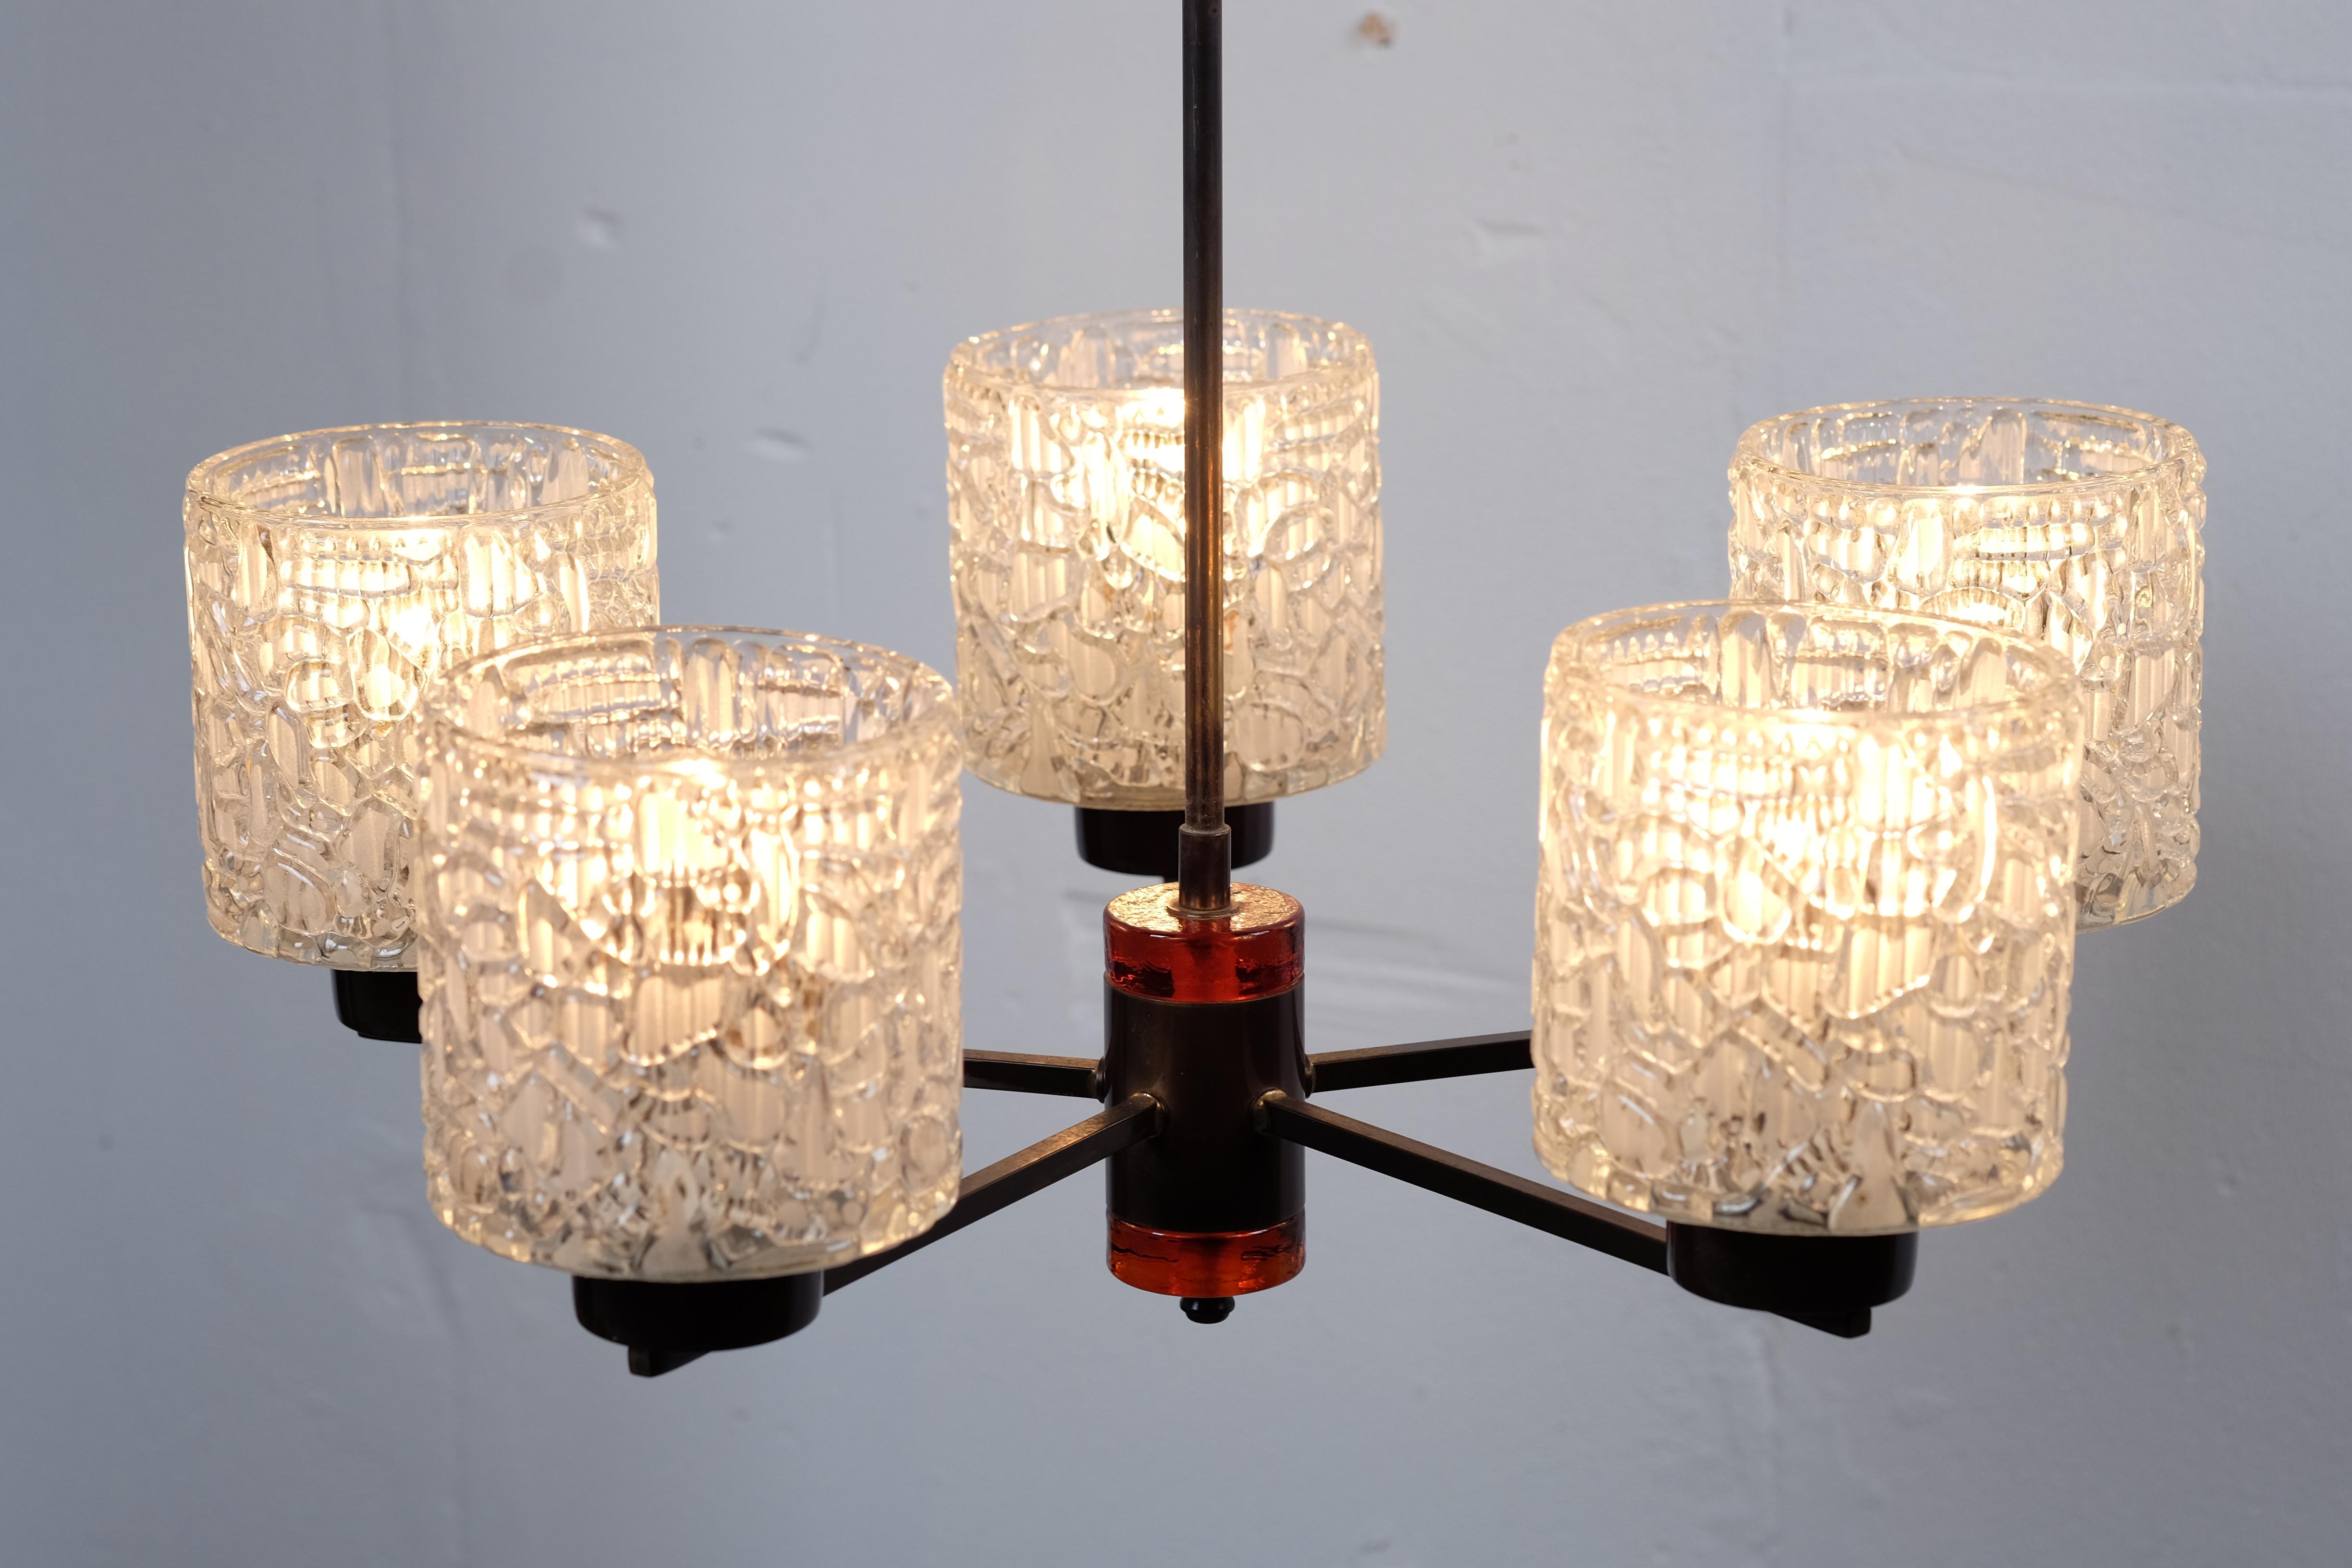 Orrefors of Sweden 6-arm light chandelier in pressed and frosted glass by Carl Fagerlund, with brass and amber glass fitments.
The lamp are in good condition and with no chips or damage in the glass. 

The diameter of each glass is